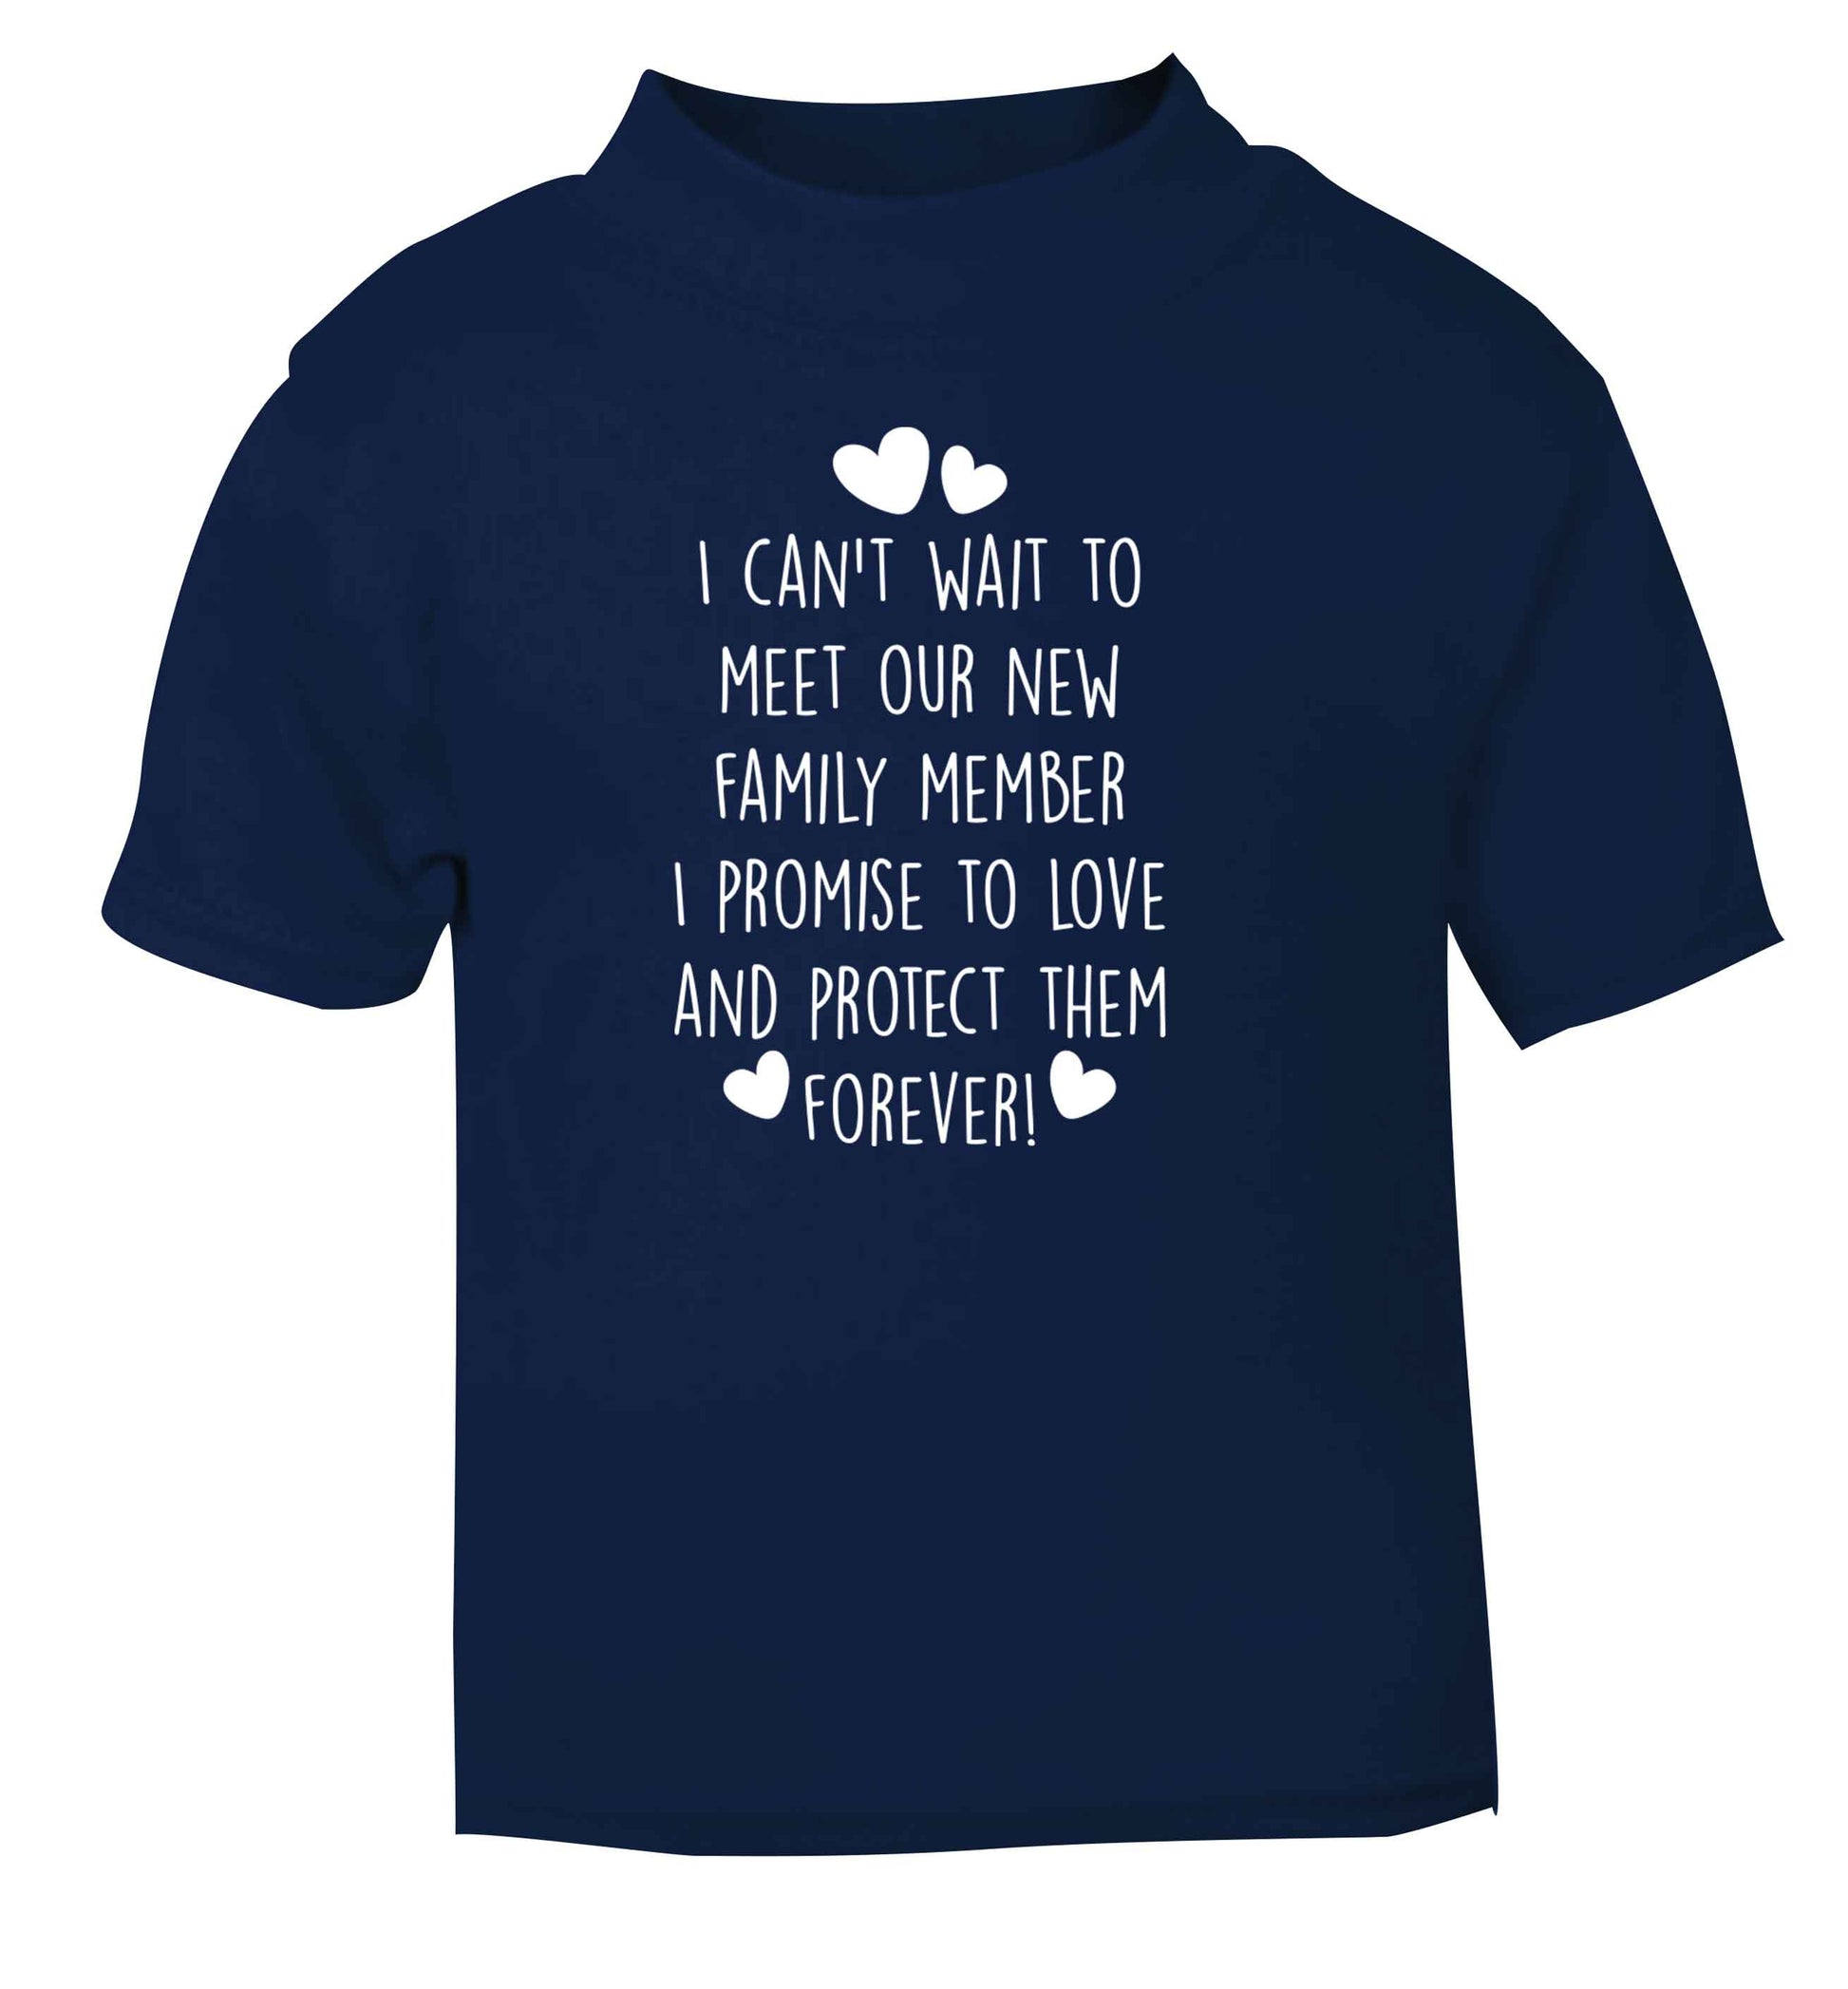 I can't wait to meet our new family member I promise to love and protect them forevernavy Baby Toddler Tshirt 2 Years